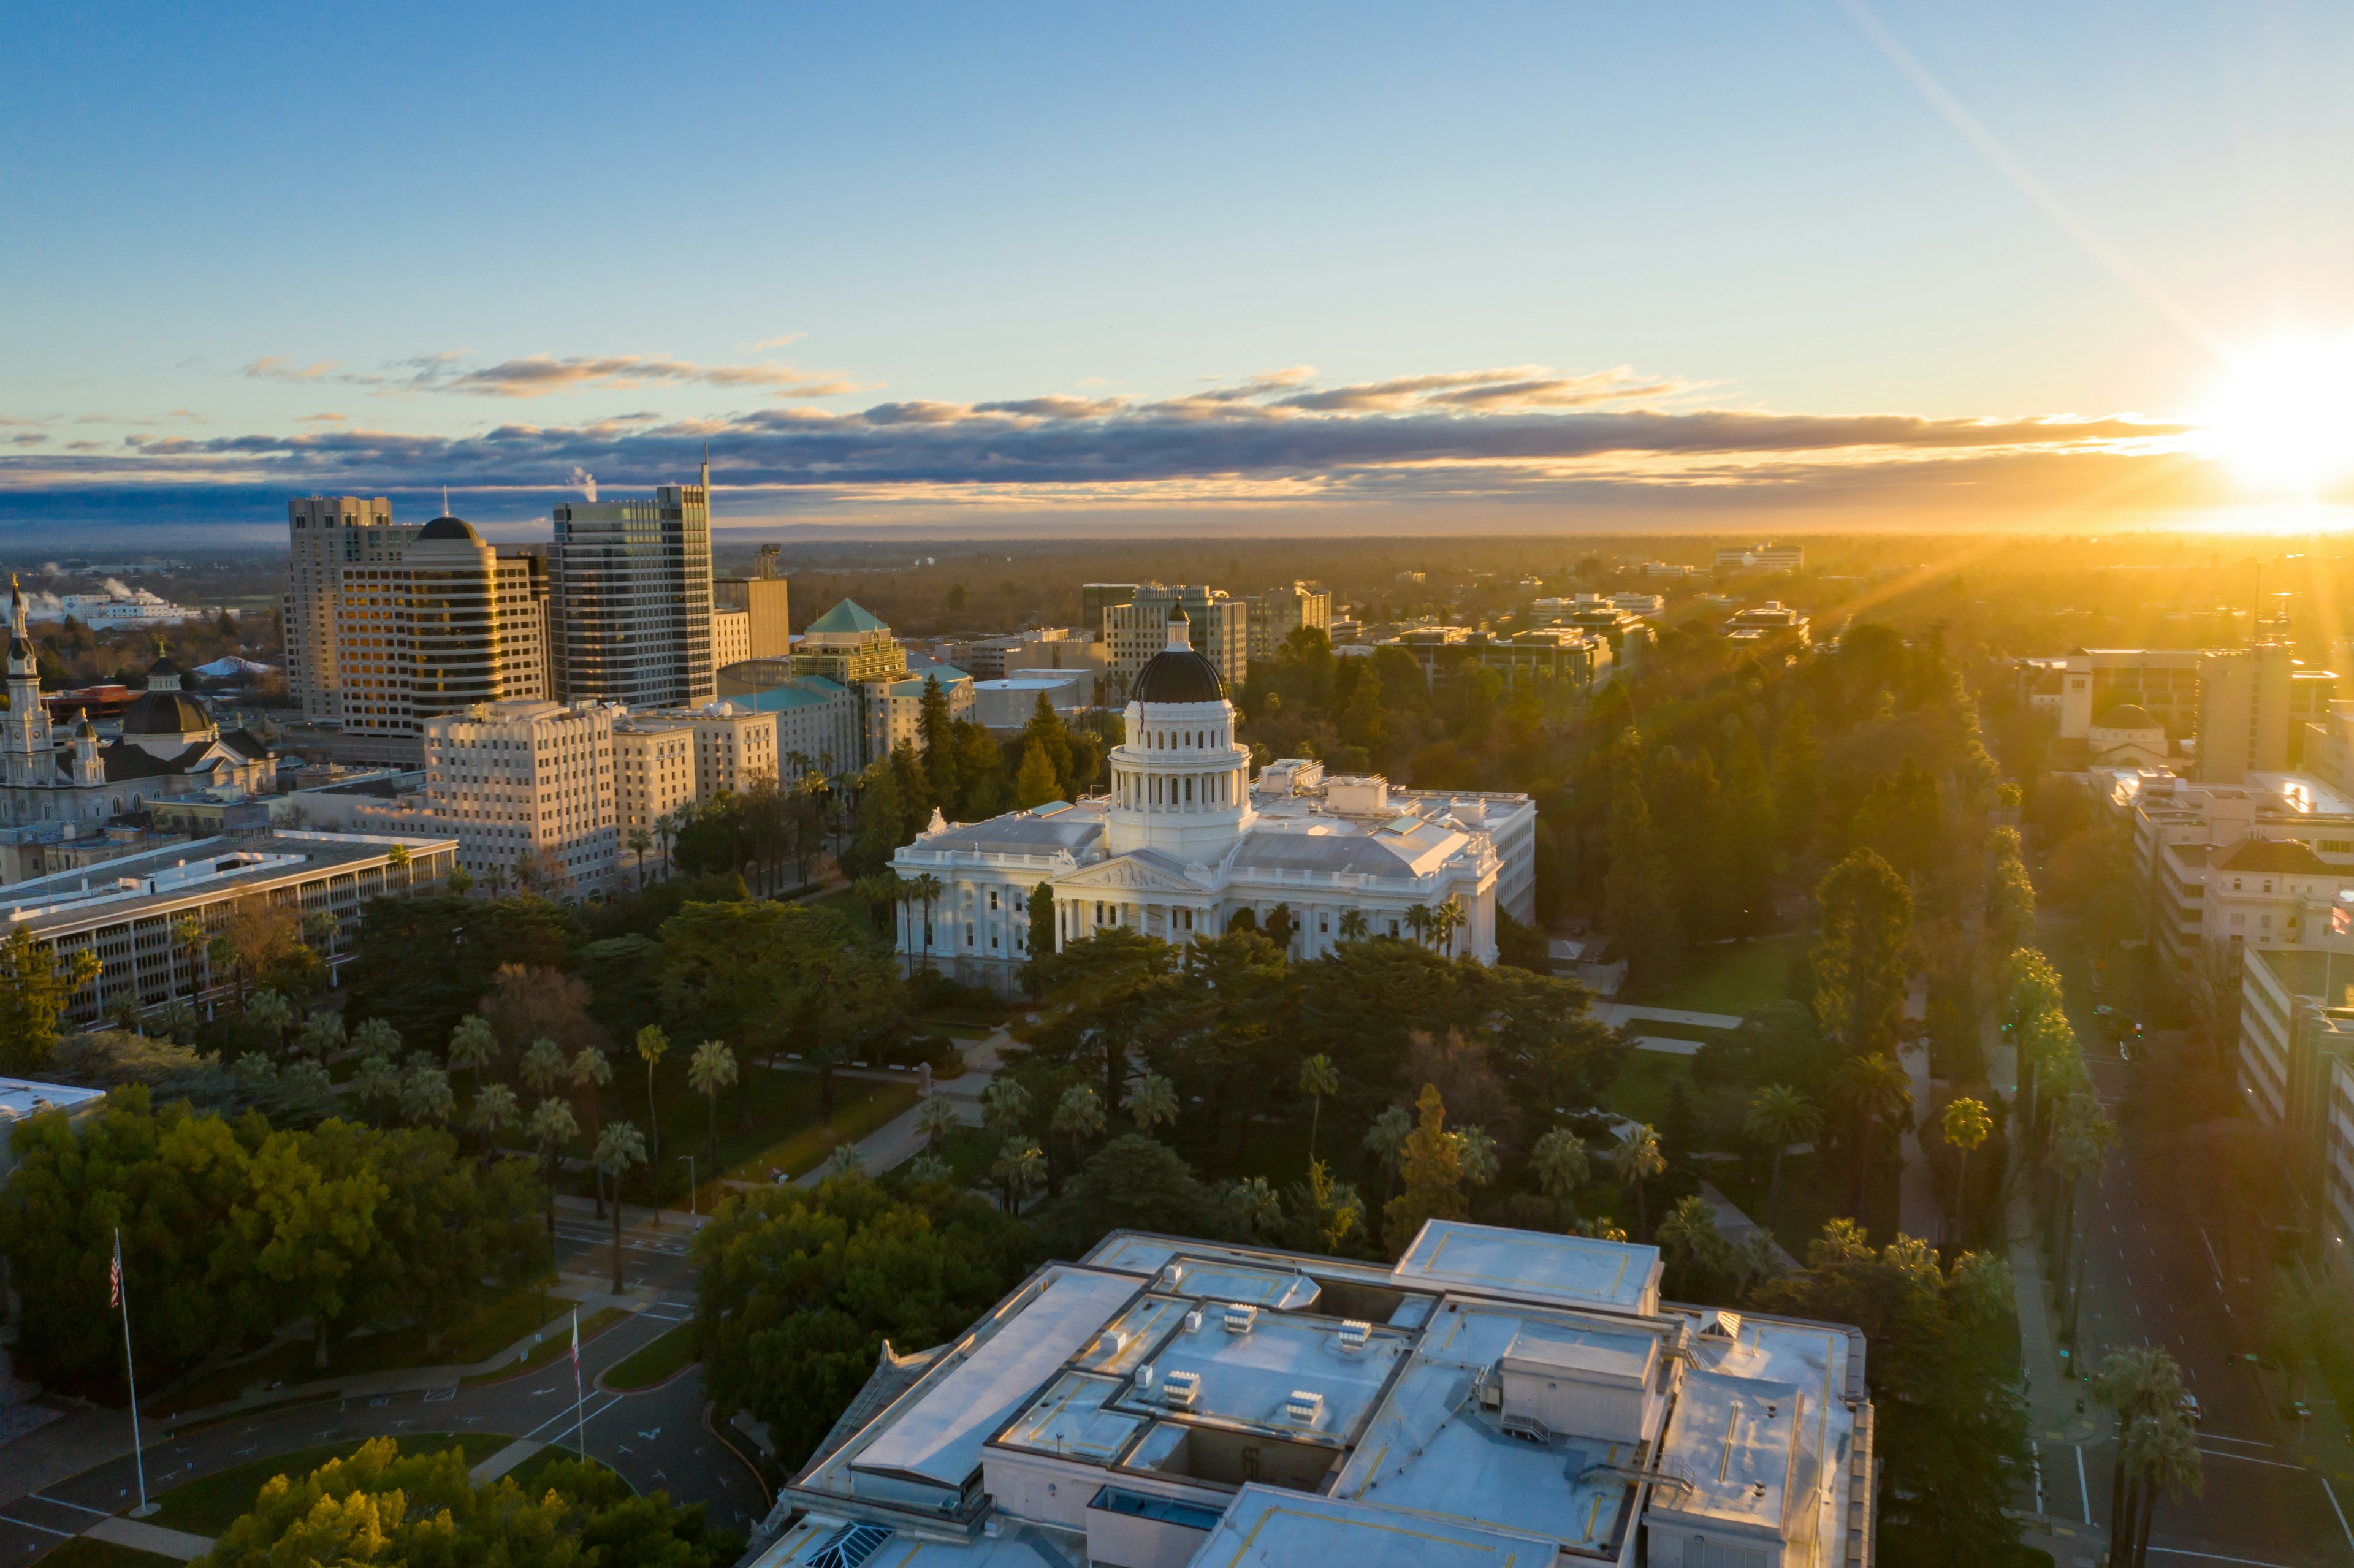 Sacramento, CA - United States of America - 01-07-2021: "California State Capitol Building, Downtown Sacramento, CA during Sunrise - Aerial Drone View"; Shutterstock ID 1889675725; your: Brian Healy; gl: 65050; netsuite: Lonely Planet Online Editorial; full: Best neighborhoods in Sacramento